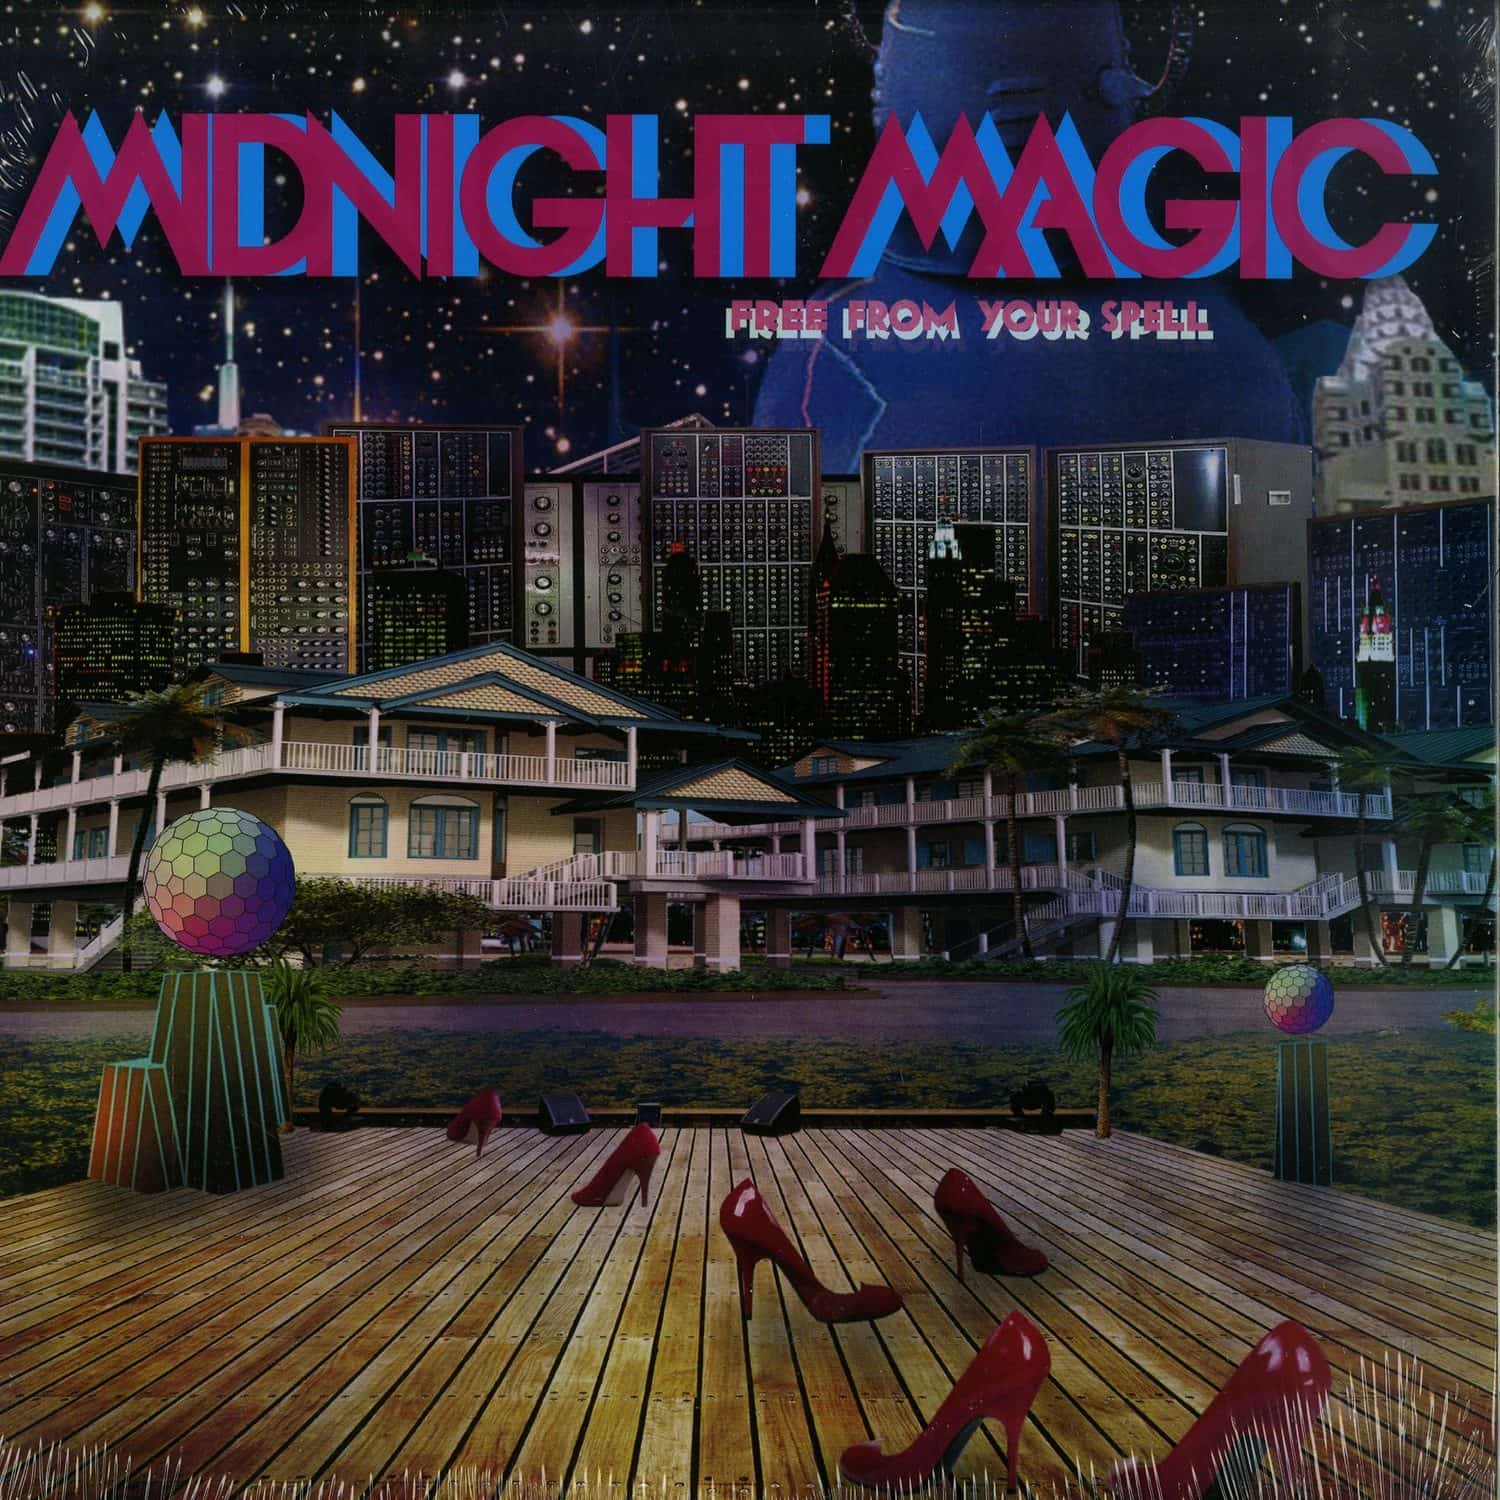 Midnight Magic - FREE FROM YOUR SPELL 